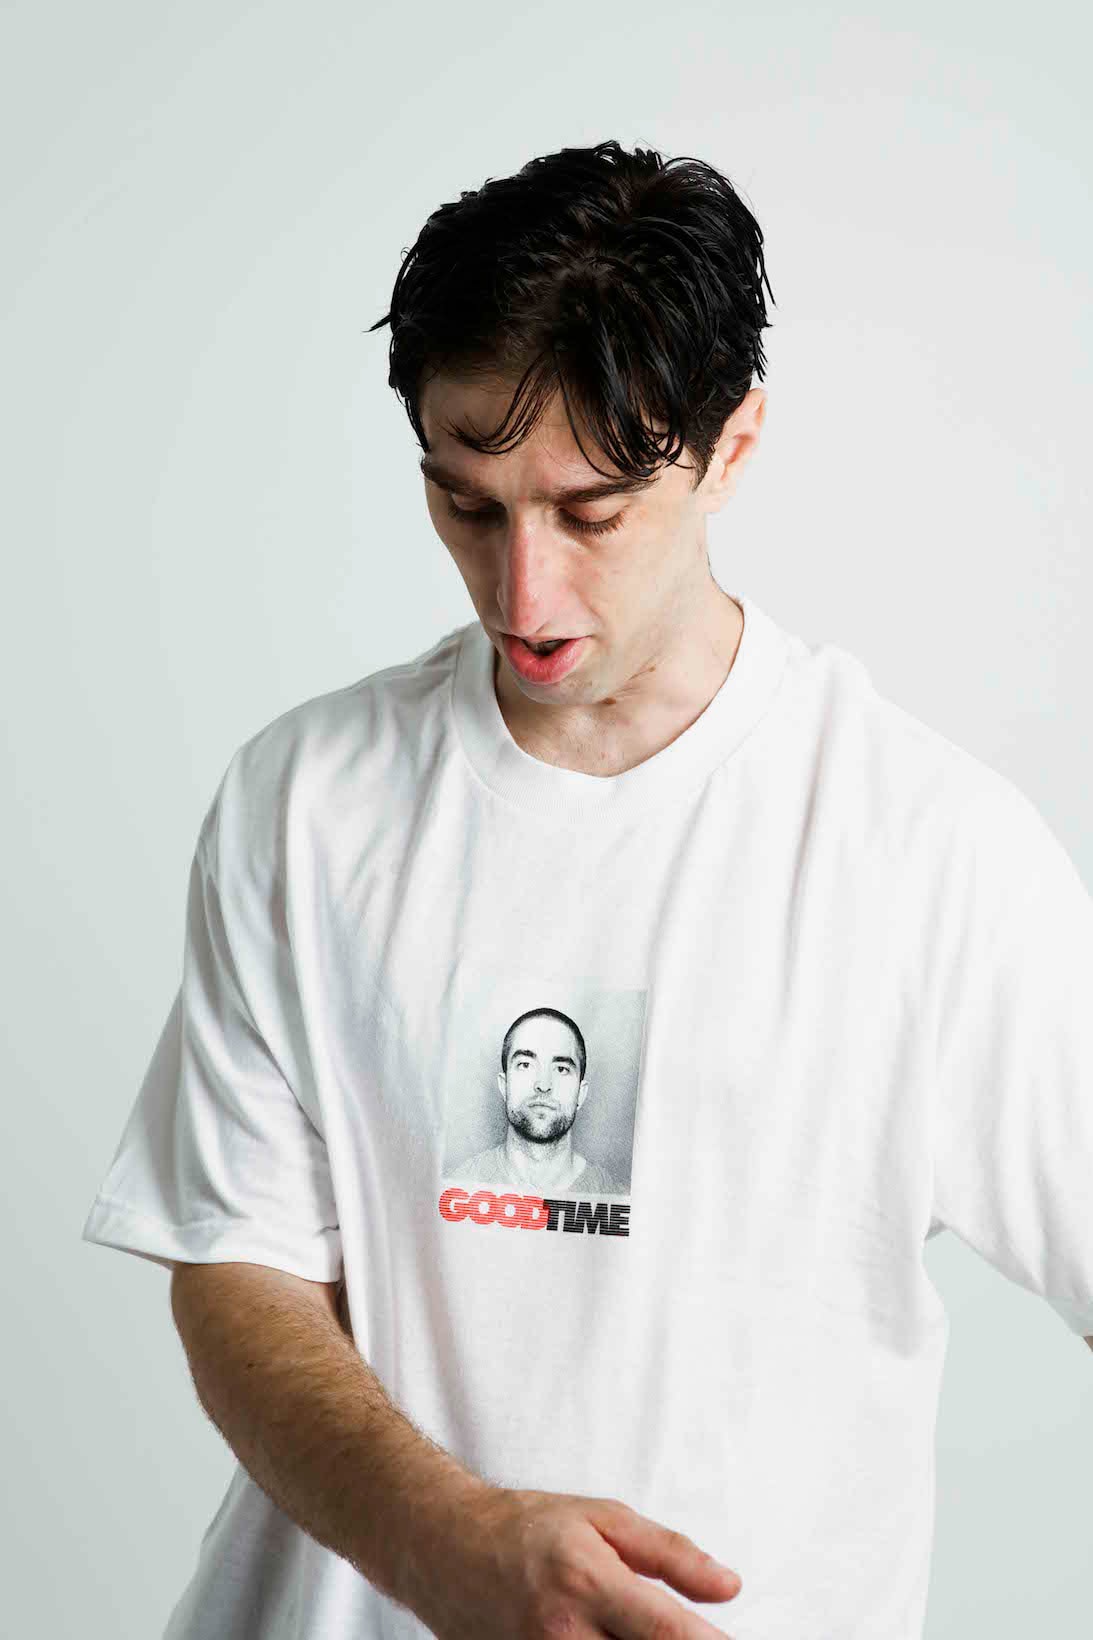 GOOD TIME Movie Safdie Brothers Robert Pattinson Know Capsule Fashion Apparel T-Shirts Tees